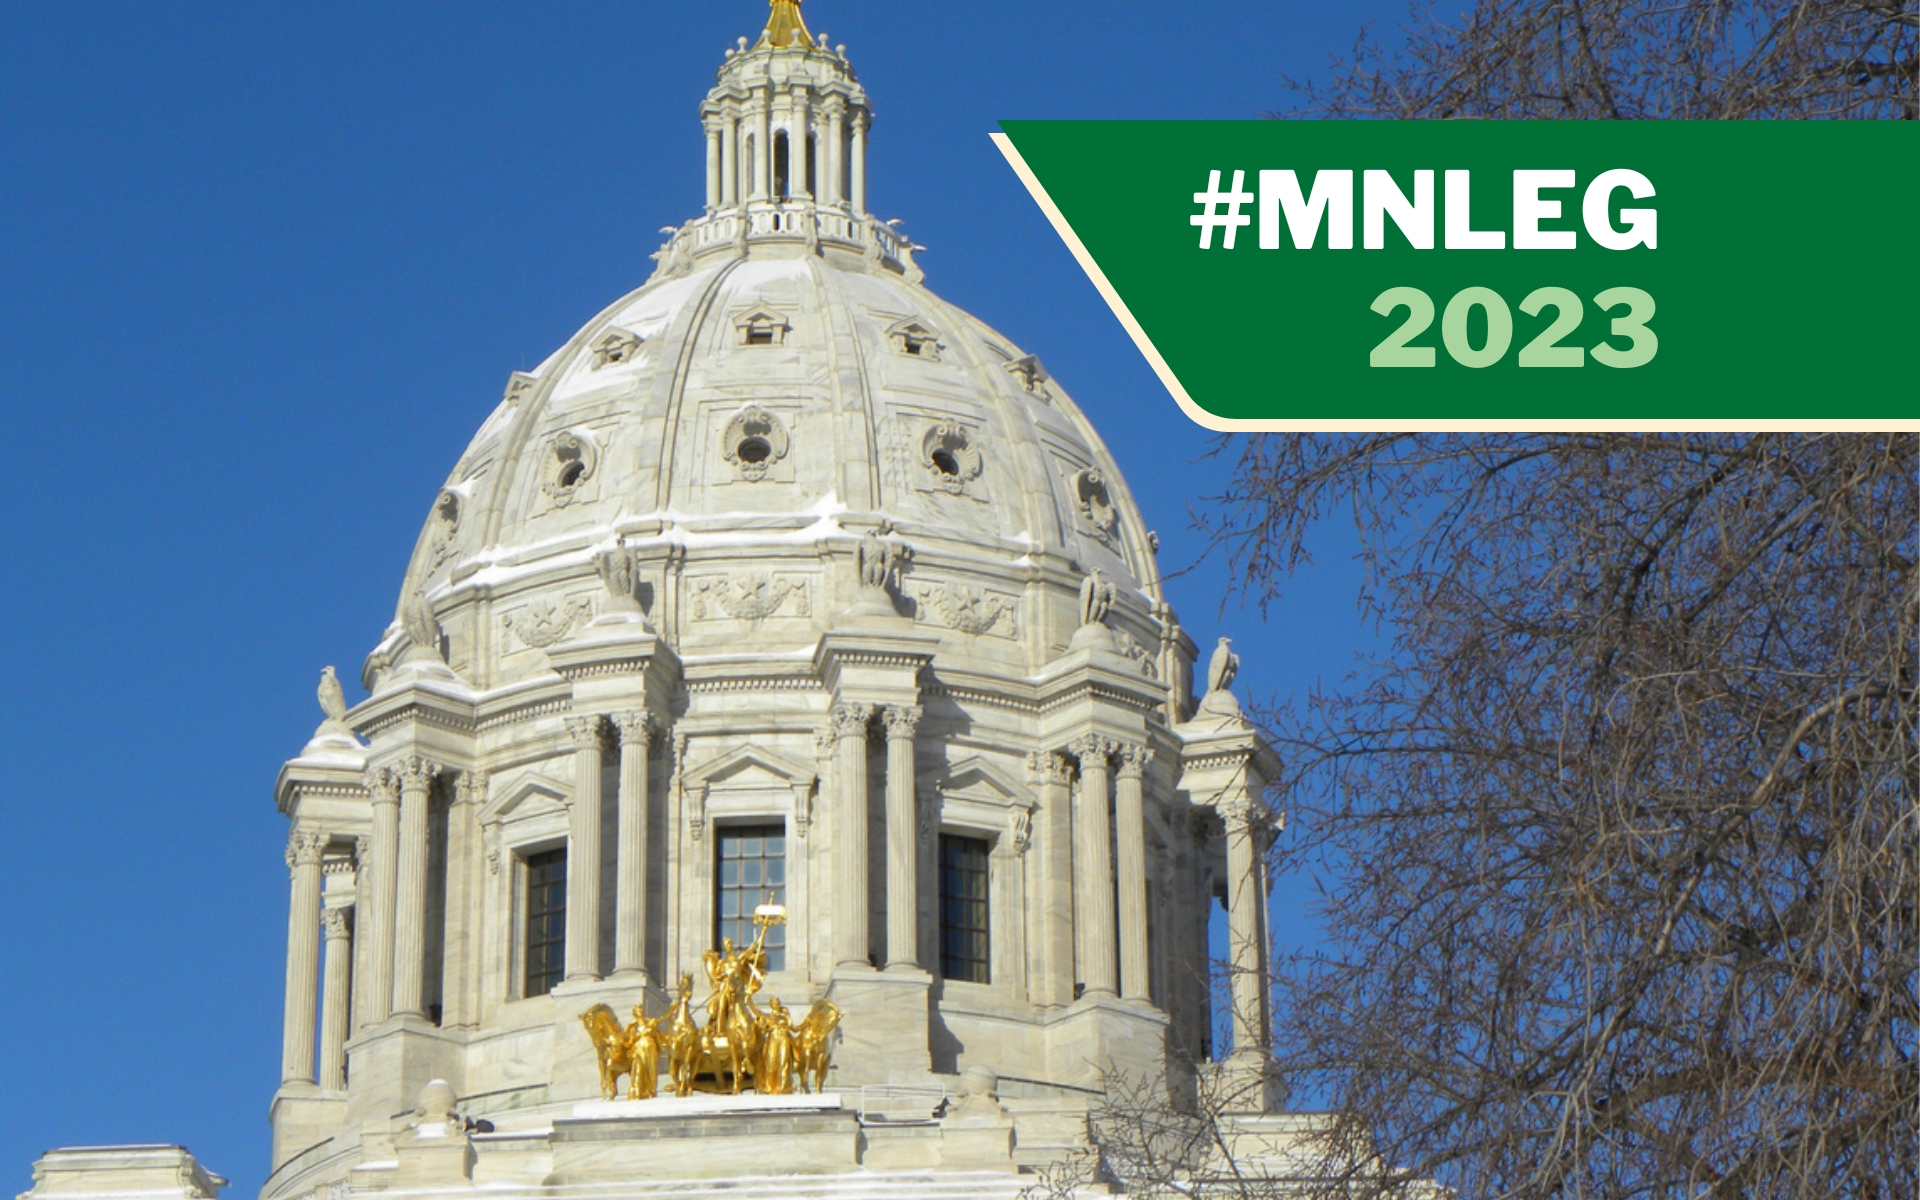 The top of the Minnesota Capitol building in St. Paul. Text overlay says "#MNLEG 2023."